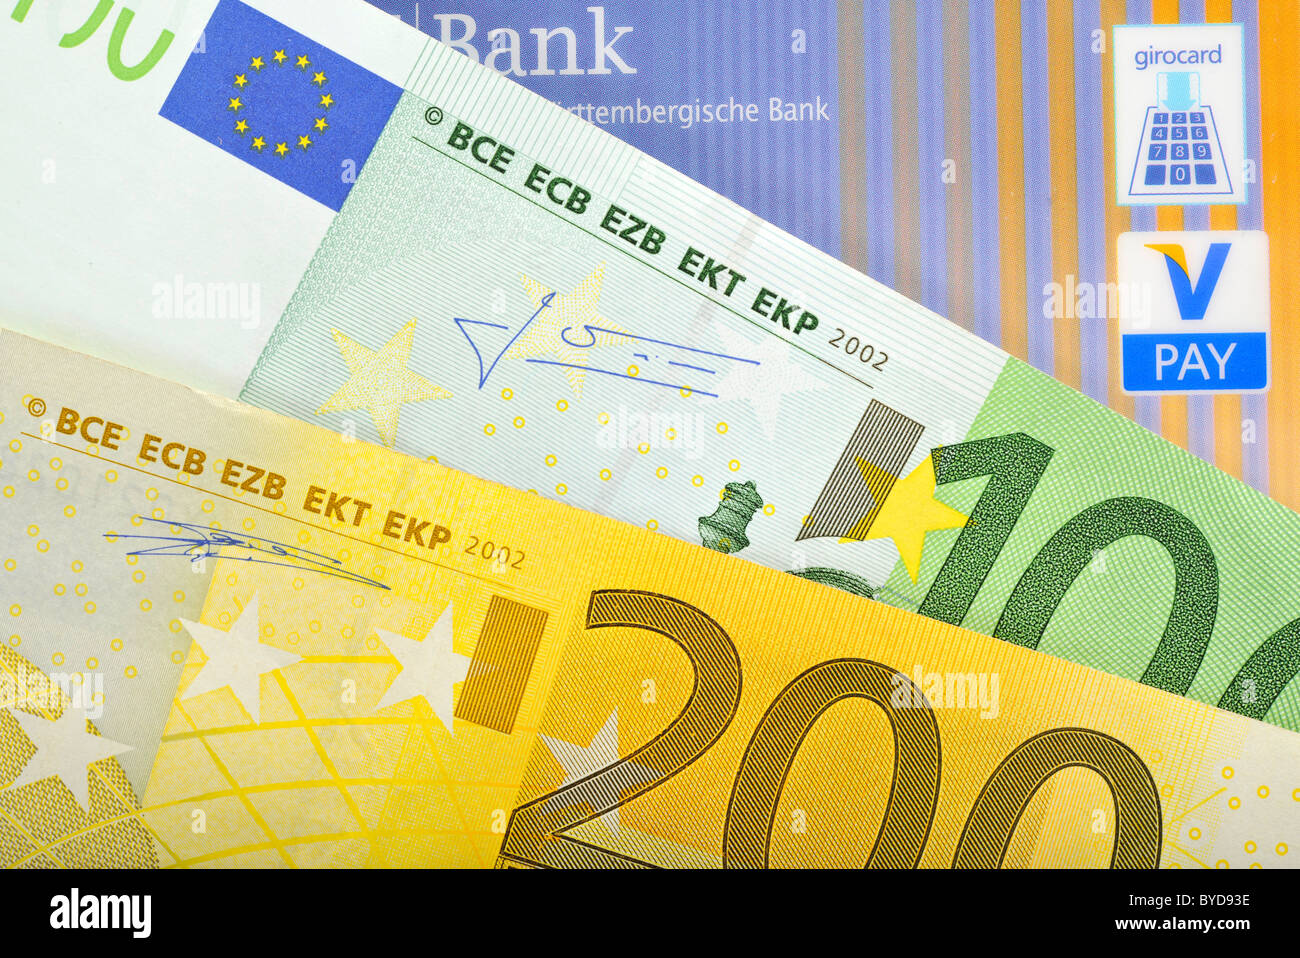 Euro banknotes, bills fanned out, bank card, cash card with the latest icons, V-PAY, VPAY, girocard Stock Photo